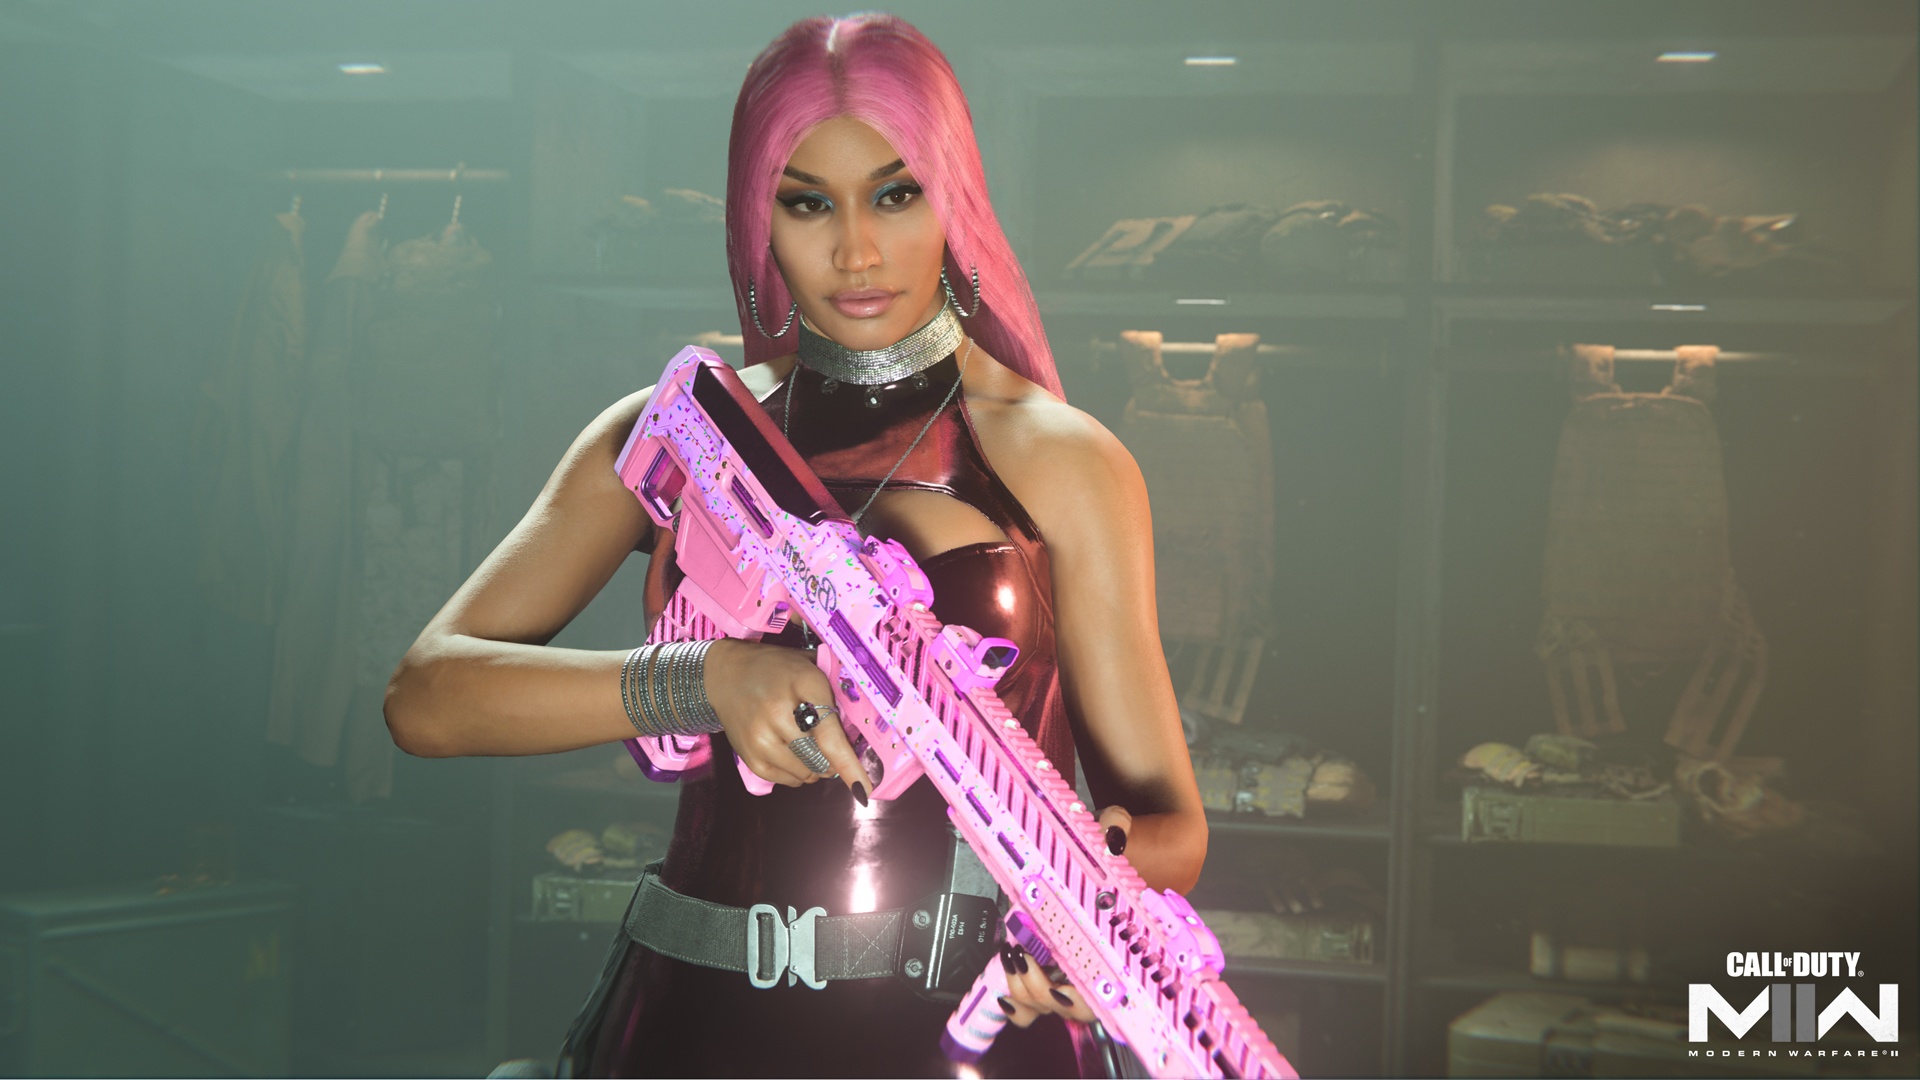 (There are countless Nicki Minajs running around in my lobbies. Coincidence? Or algorithm?)